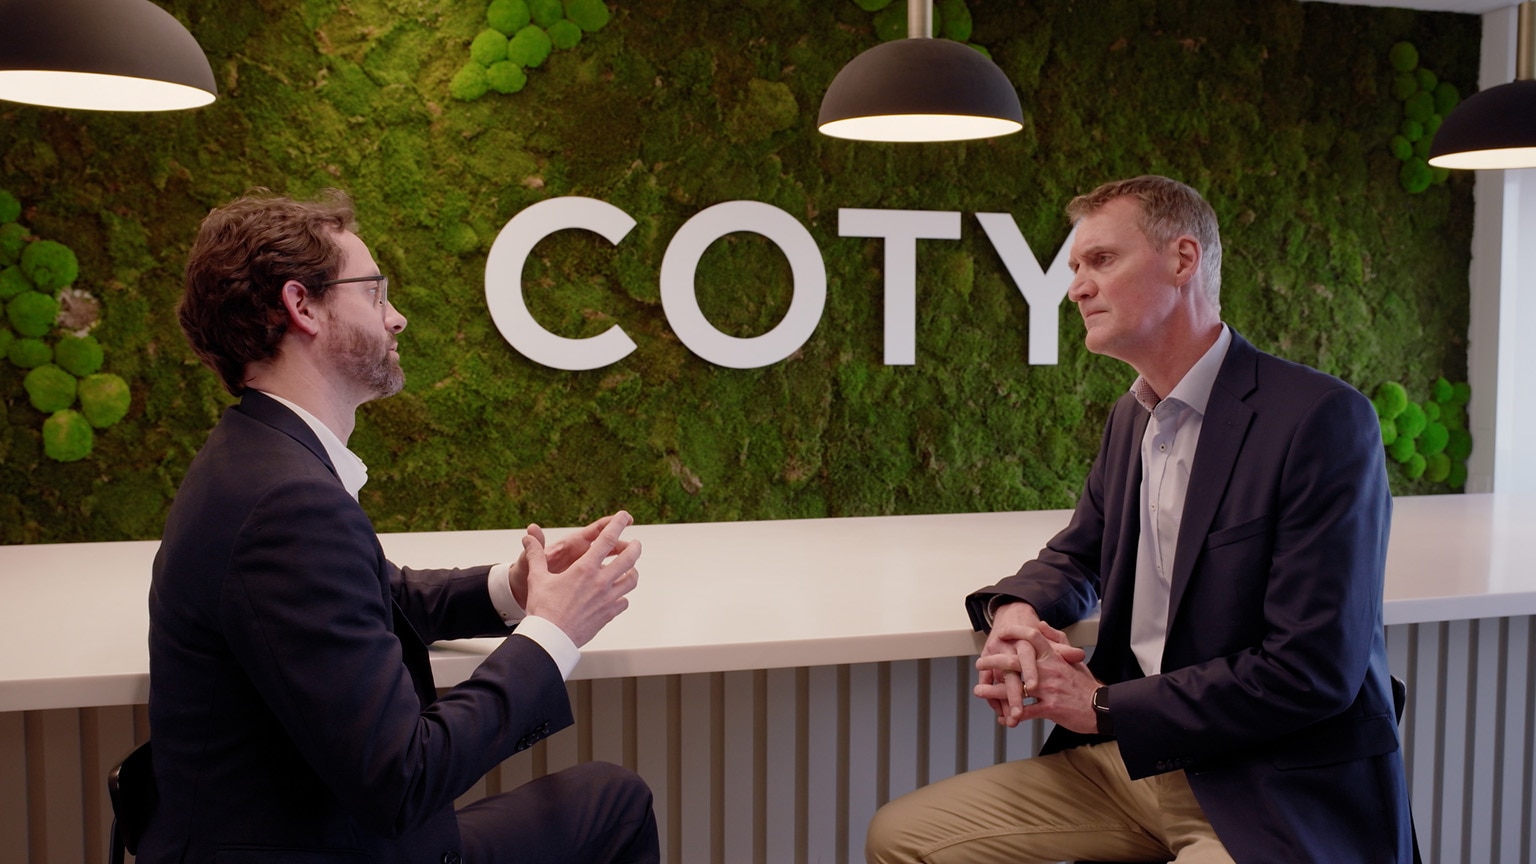 Supply chain ‘goes rouge’: Inside Coty’s makeover